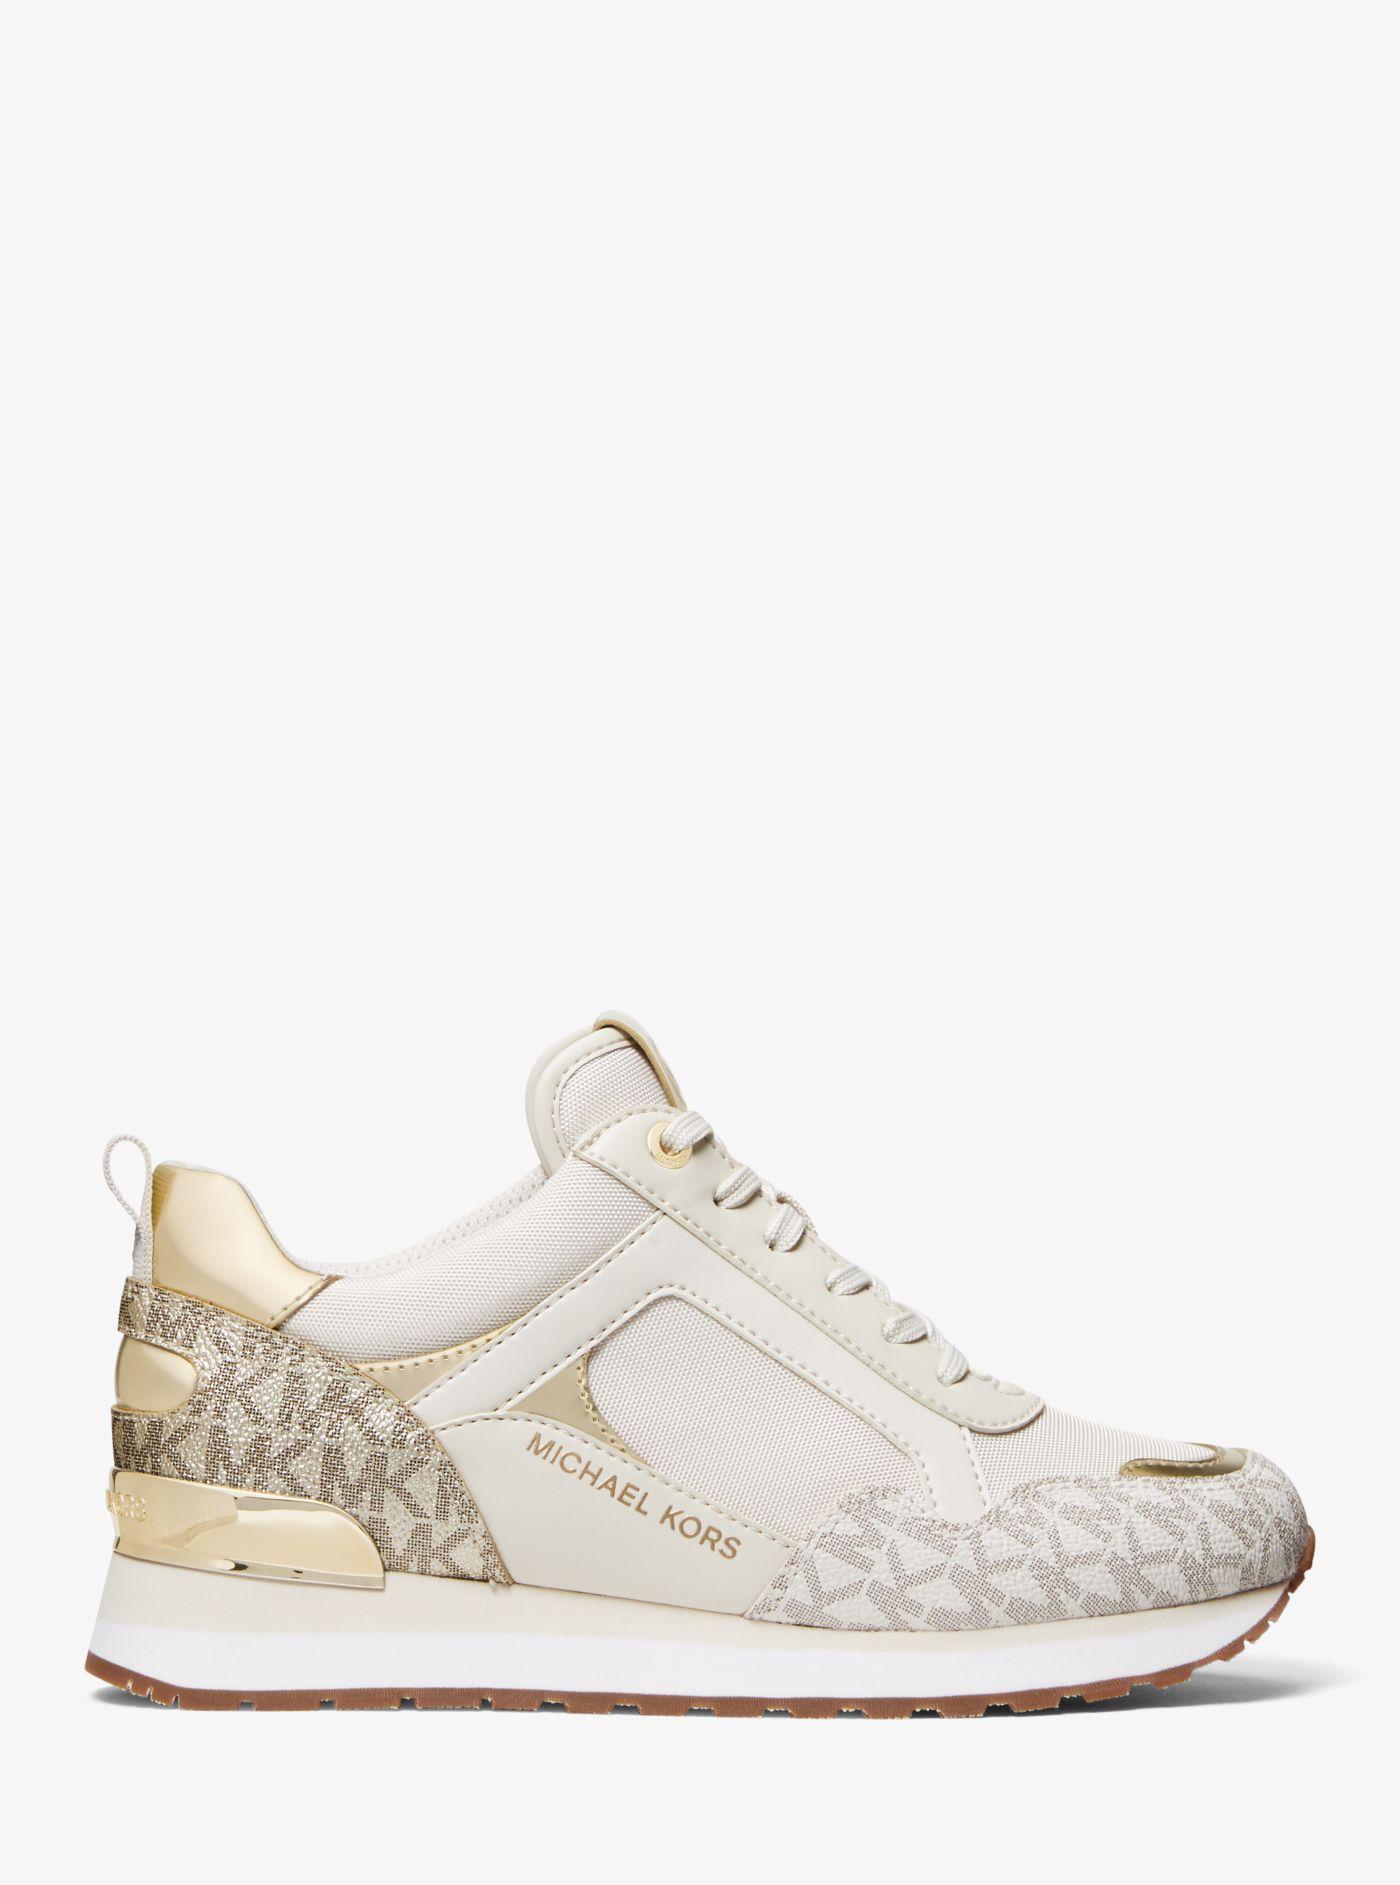 Michael Kors Canvas Wilma Two-tone Logo Trainer | Lyst